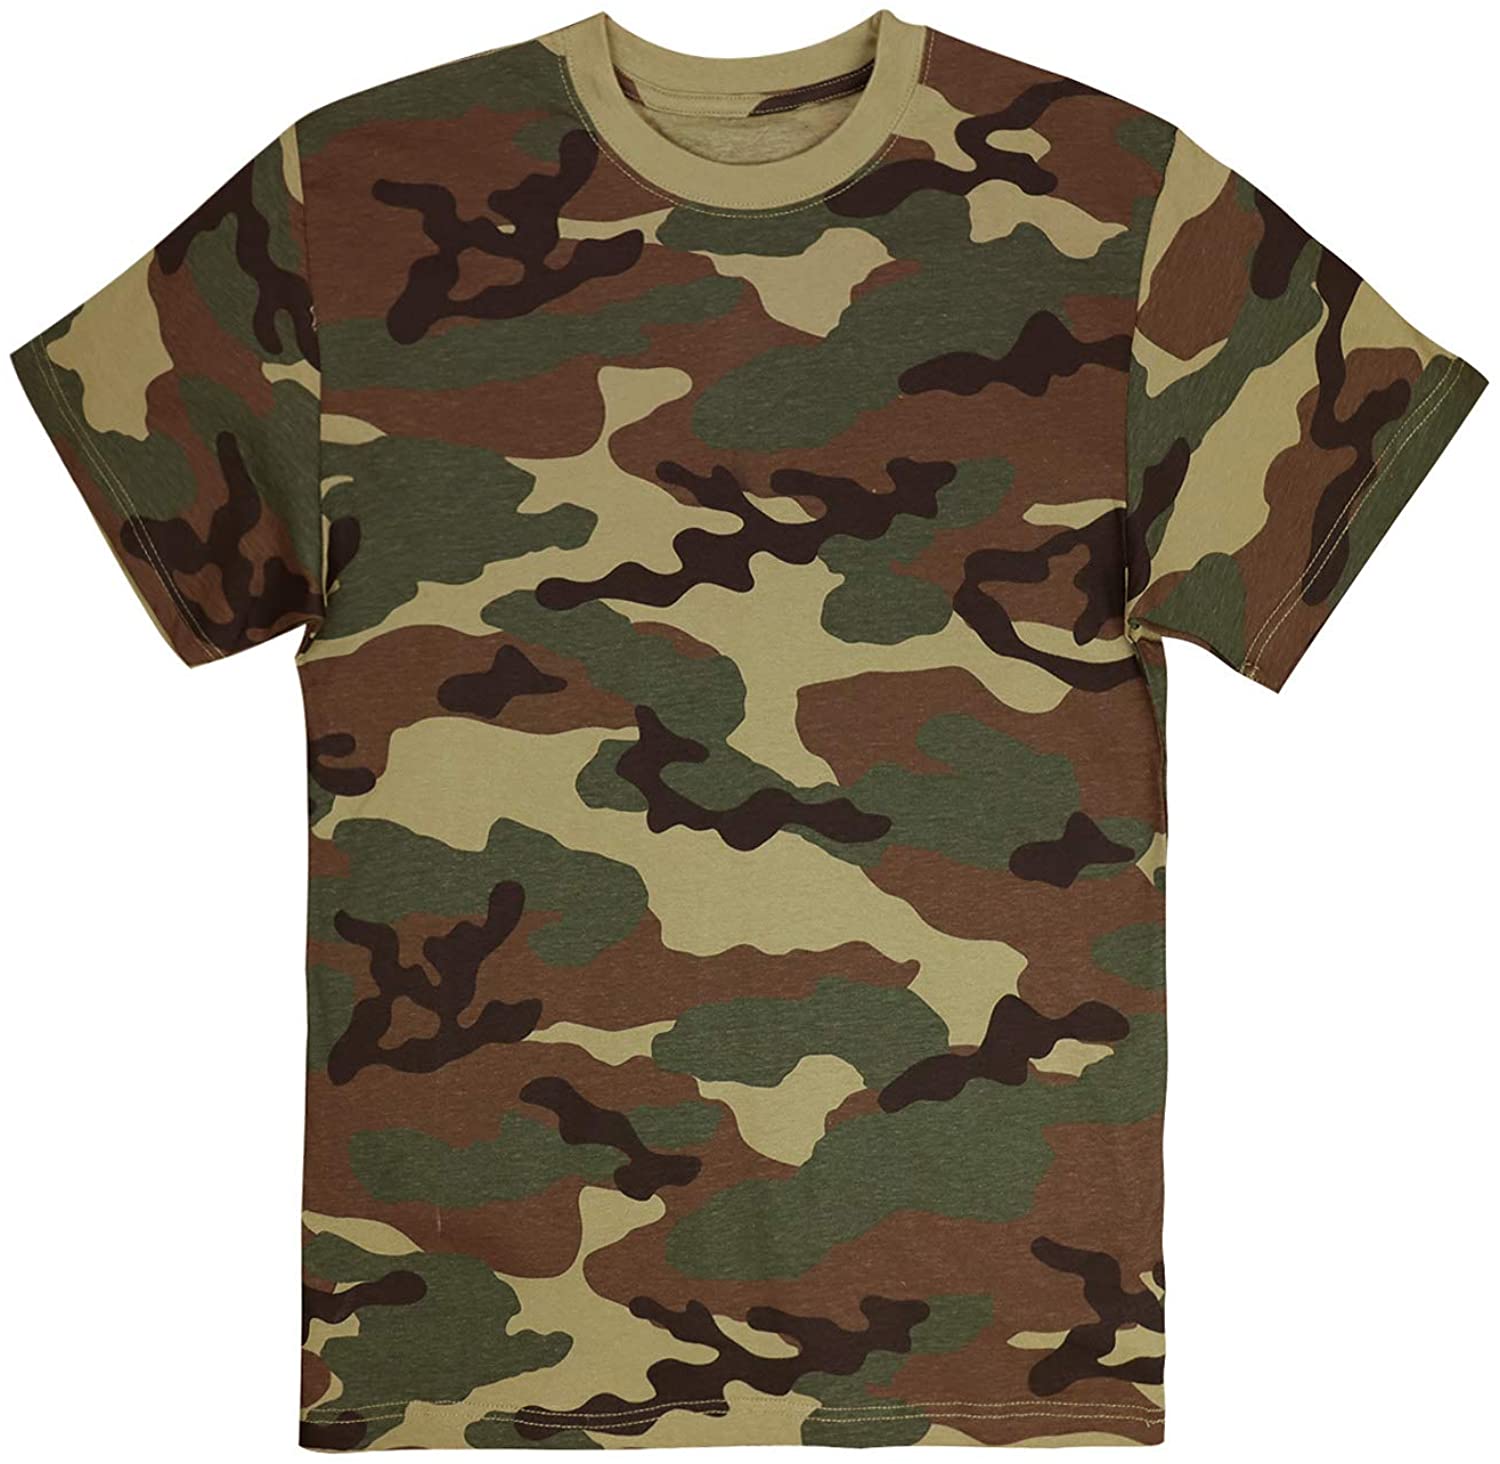 army camouflage t shirt